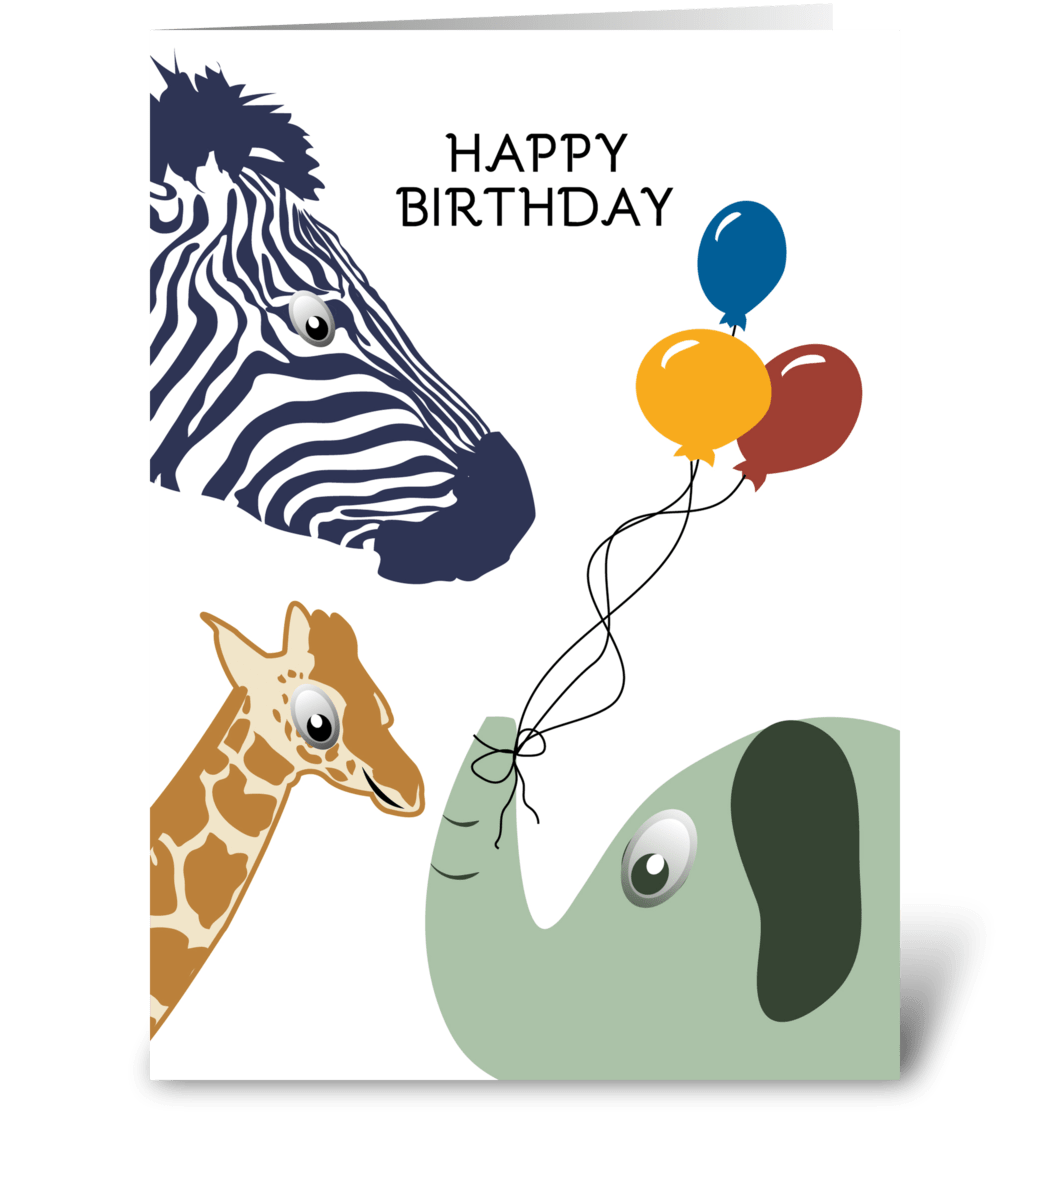 Happy Birthday Jungle Zoo Animals With B - Send this greeting card designed  by SunAtNight - Card Gnome